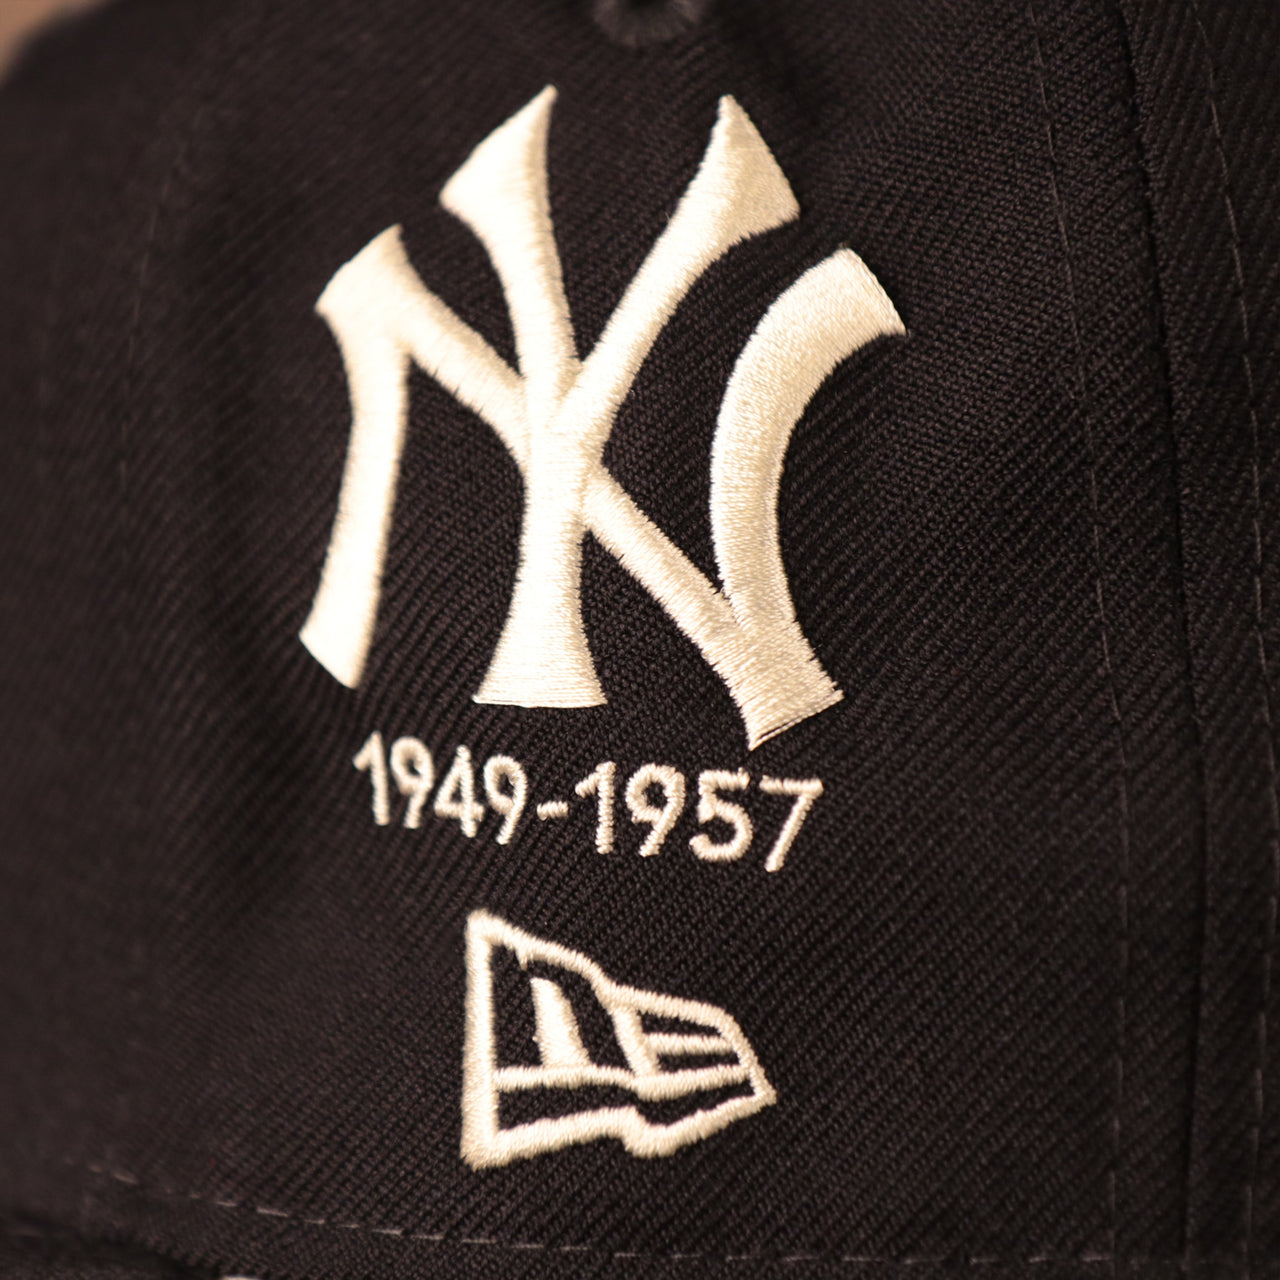 Bronx Bombers and New Era logo on the navy, logo history all-over fitted hat by New Era.